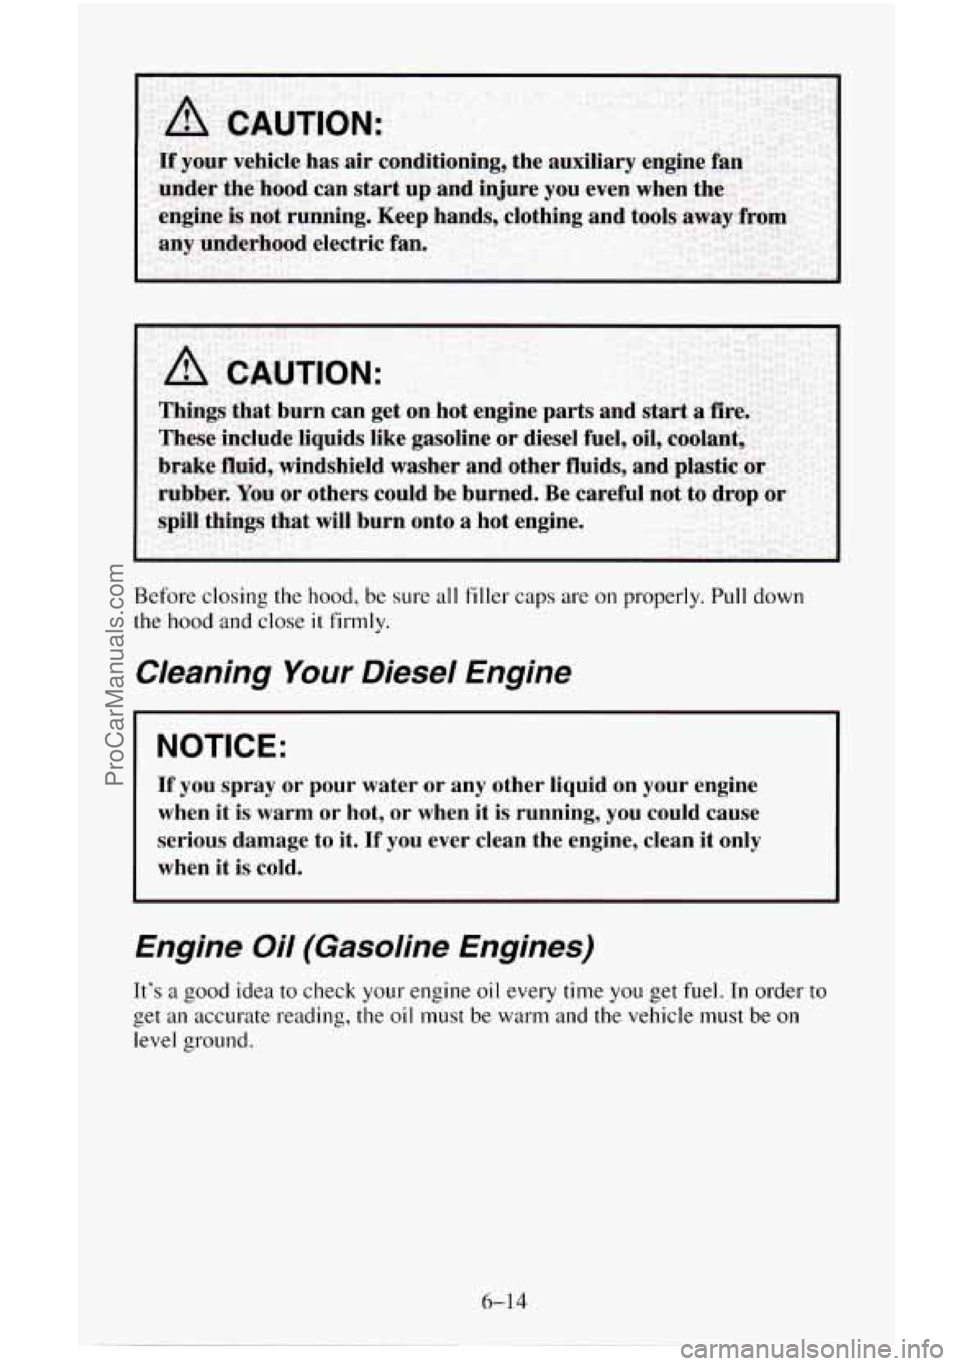 CHEVROLET SUBURBAN 1996  Owners Manual Before closing the hood, be sure  all filler  caps  are  on properly.  Pull down 
the hood and close it firmly. 
Cleaning Your Diesel  Engine 
NOTICE: 
If you  spray  or  pour  water  or any  other  l